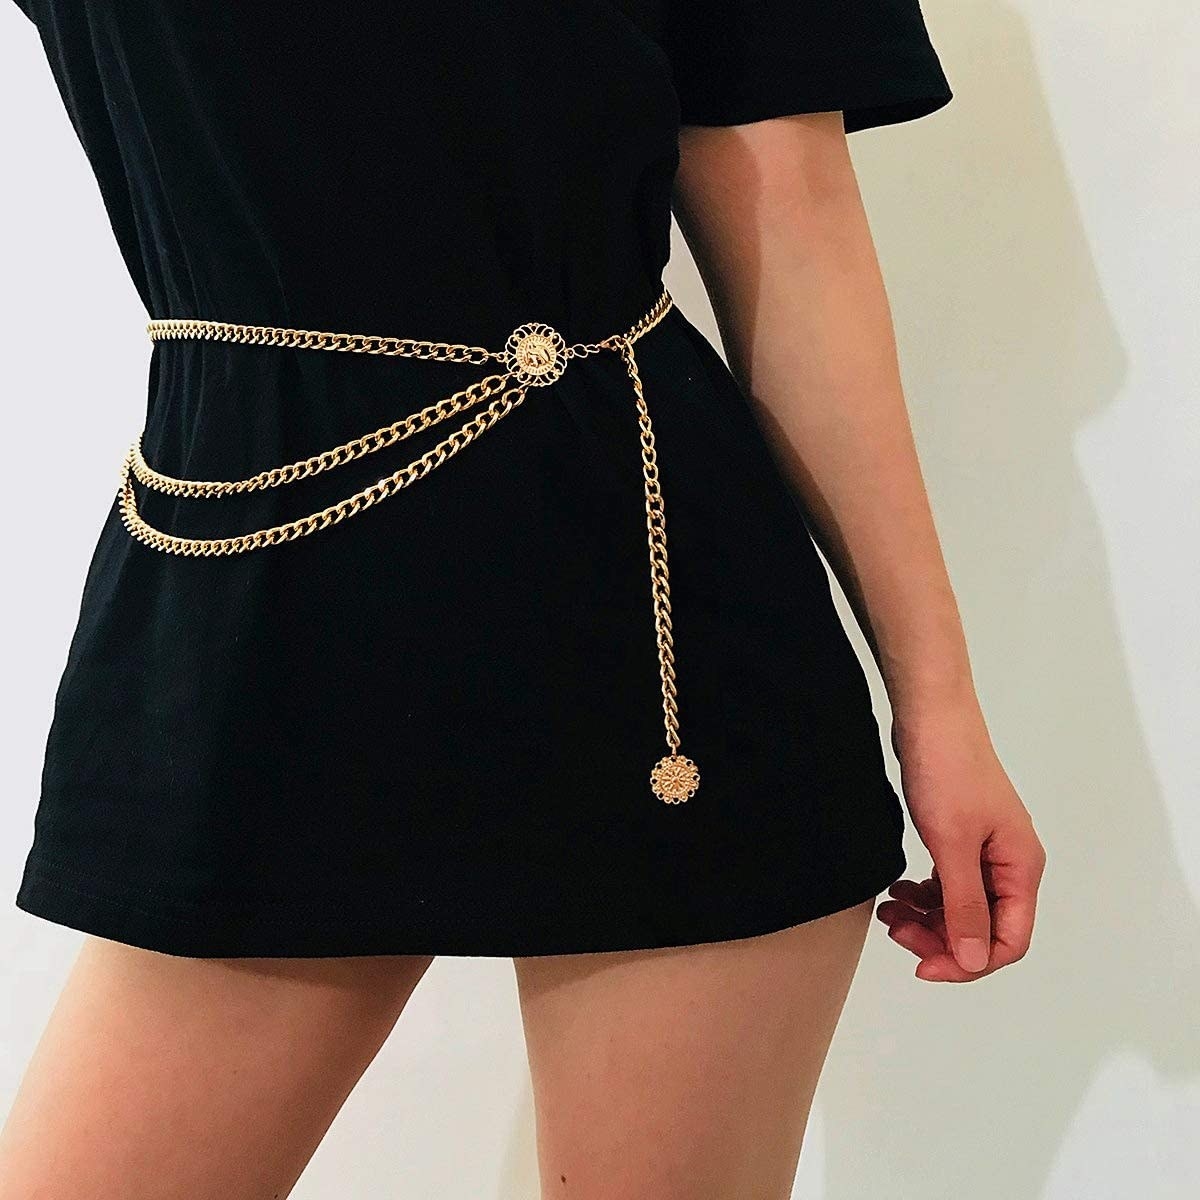 A person wearing the chain belt over a baggy t shirt dress